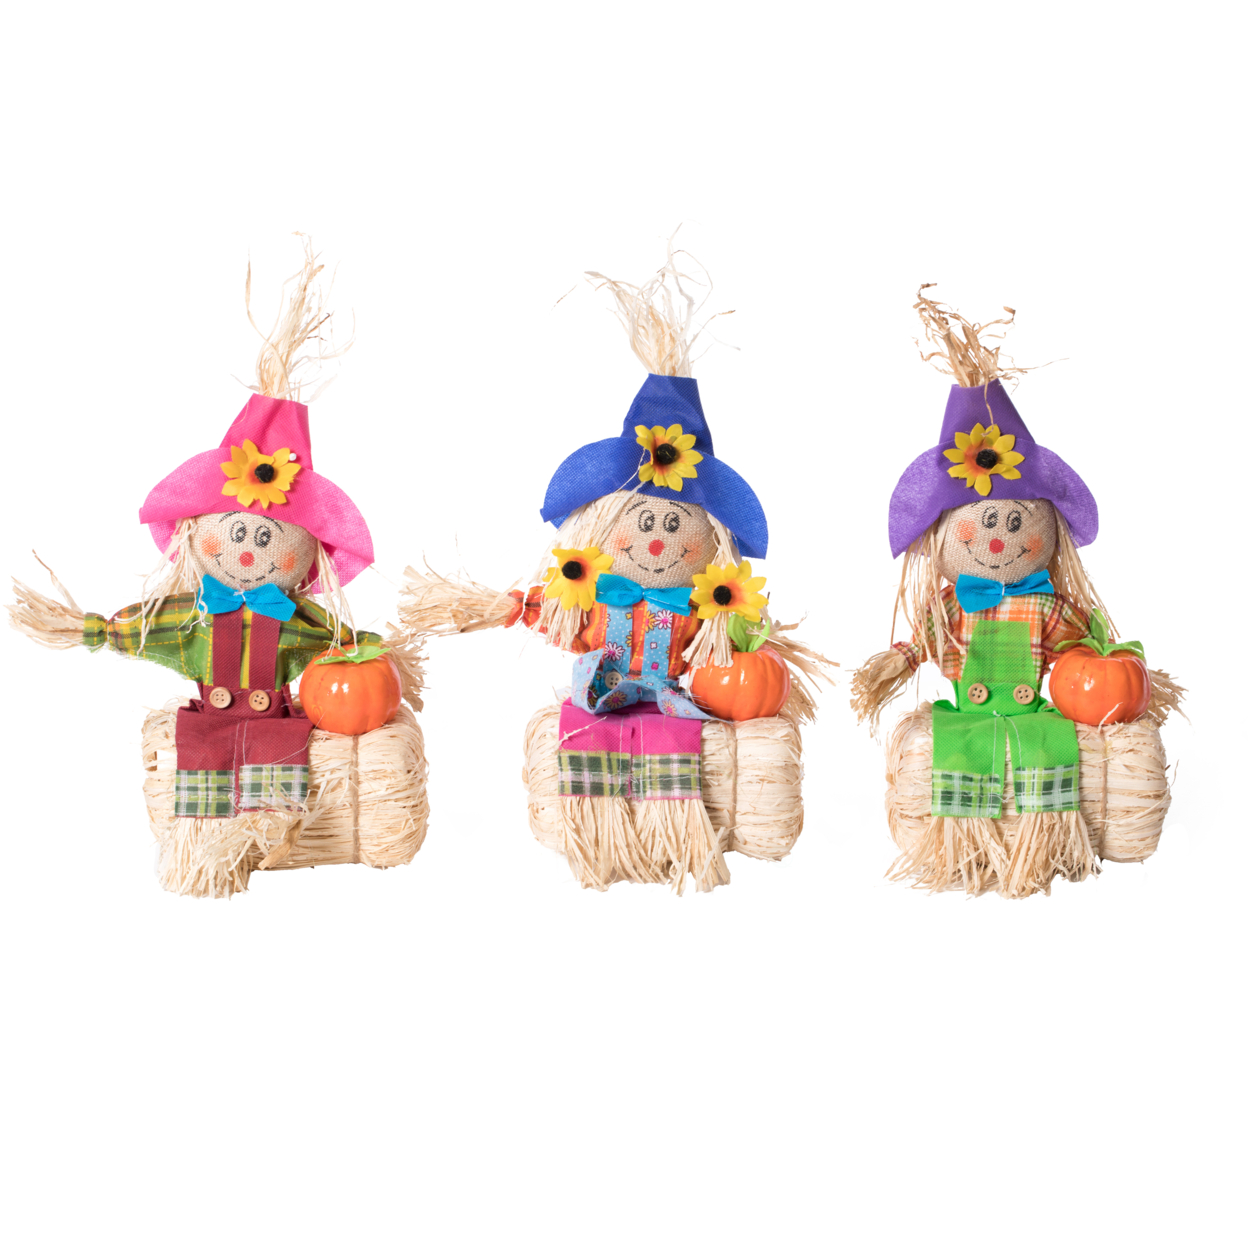 Outdoor Fall Decor Halloween Scarecrow For Garden Ornament Sitting On Hay Bale, Straw Multicolor, Set Of 3, 12 In.